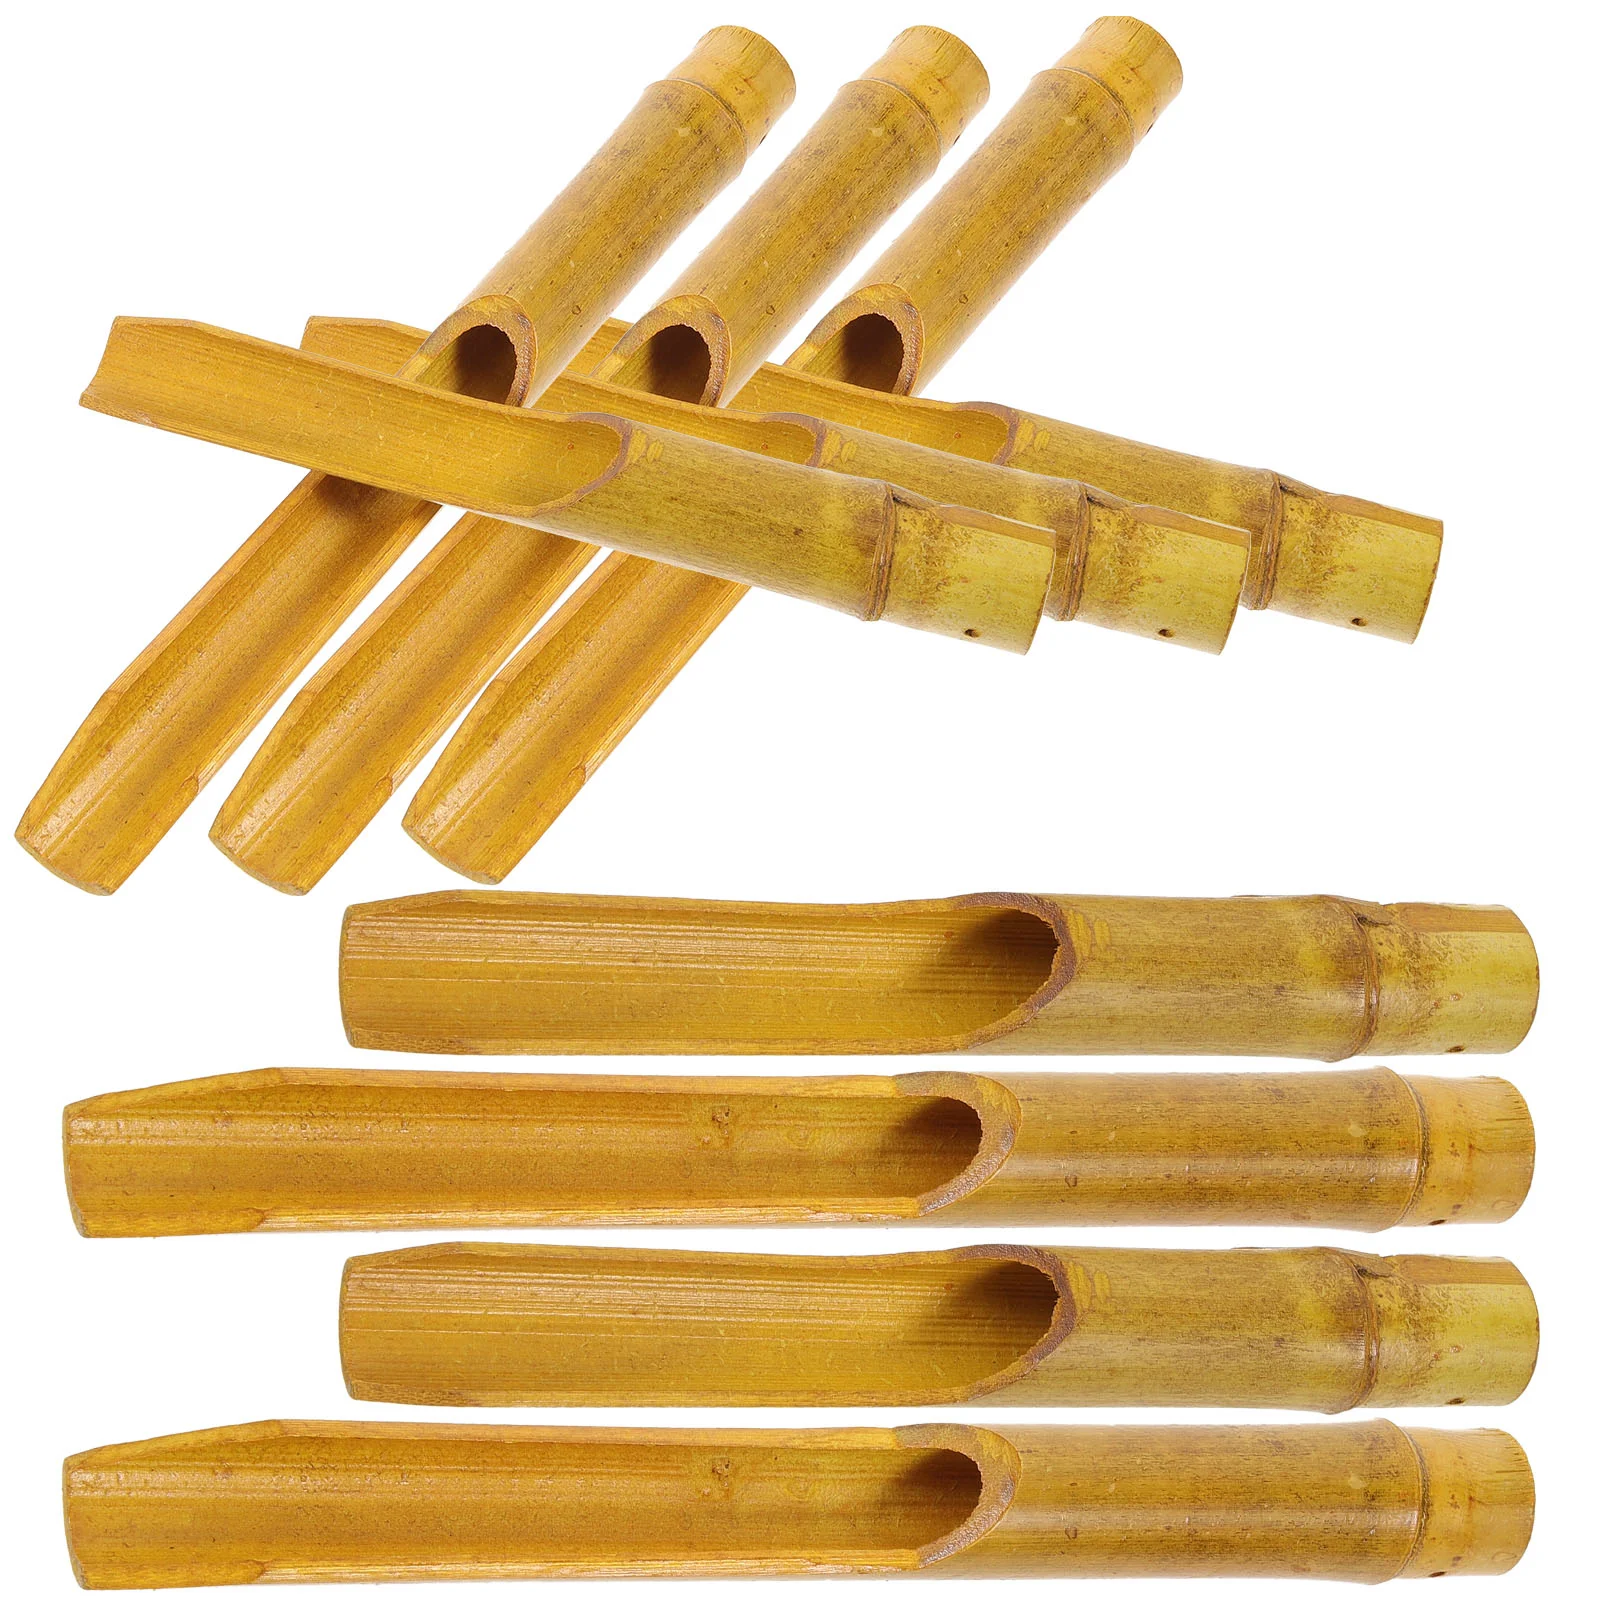 

10 Pcs Bamboo Wind Chimes Fittings Home Forniture Decor Garden Tube Hollow House Decorations Supplies Pipe